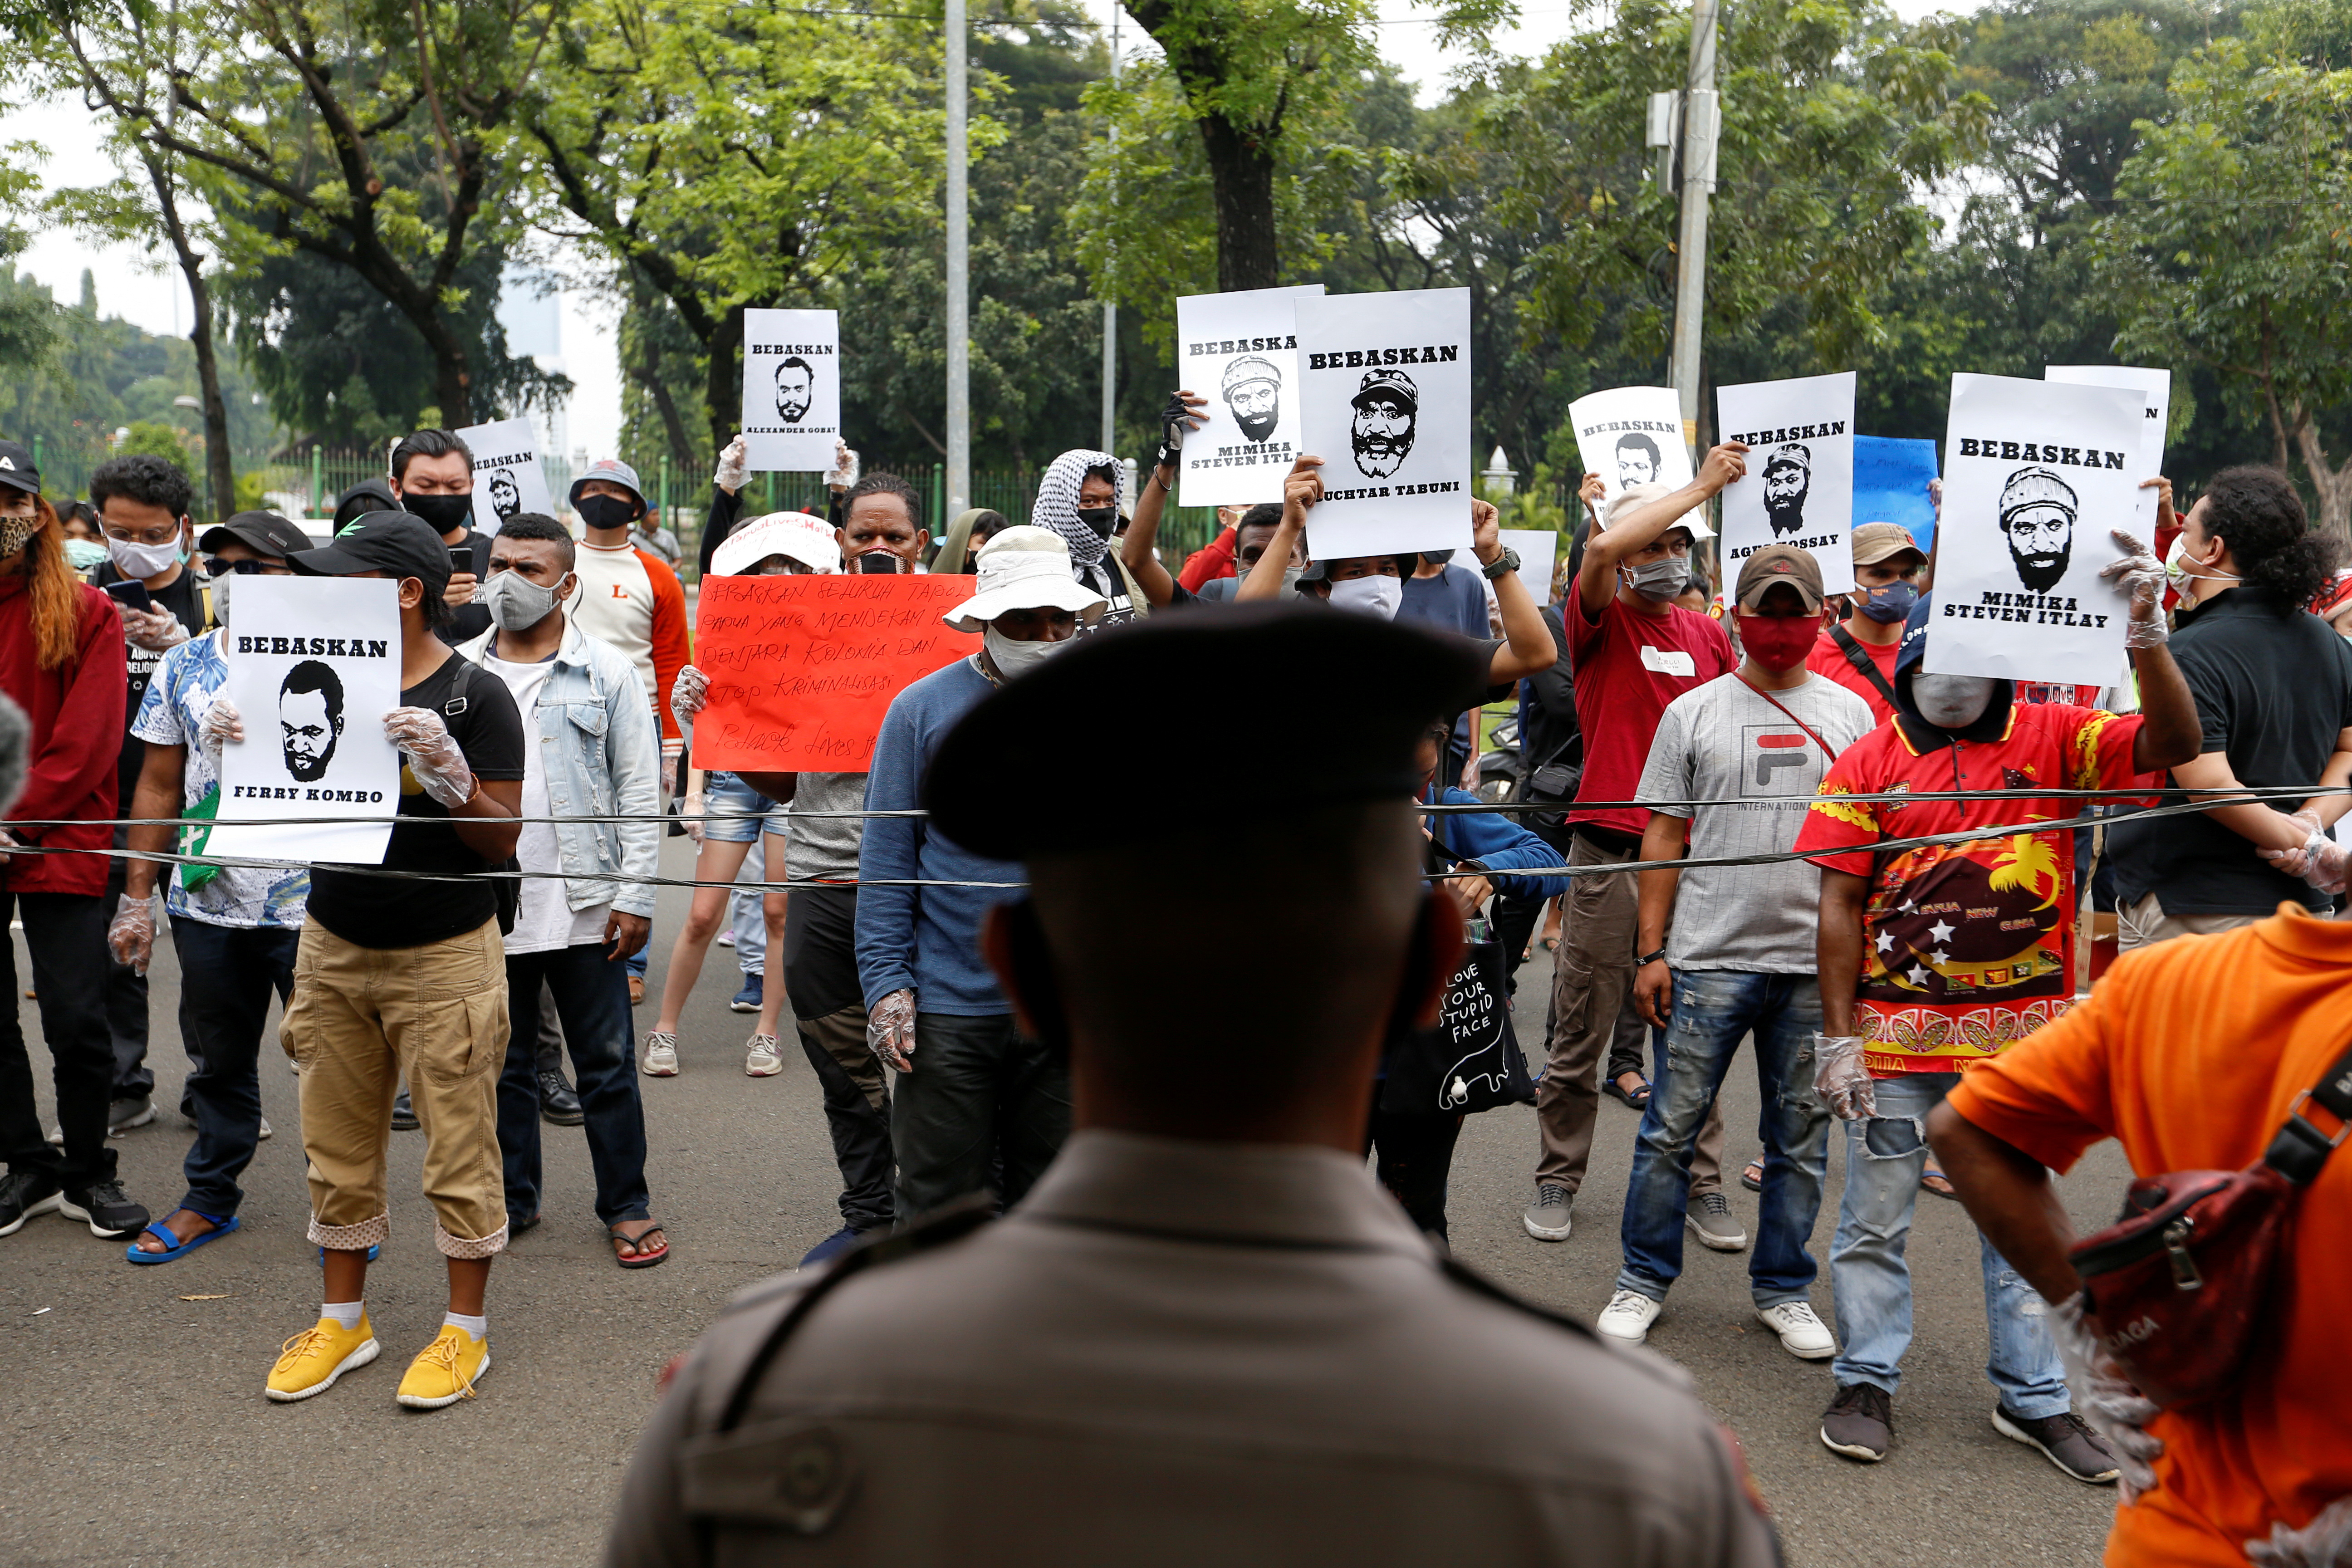 Demonstrators hold signs during a protest in front of the Supreme Court building in Jakarta